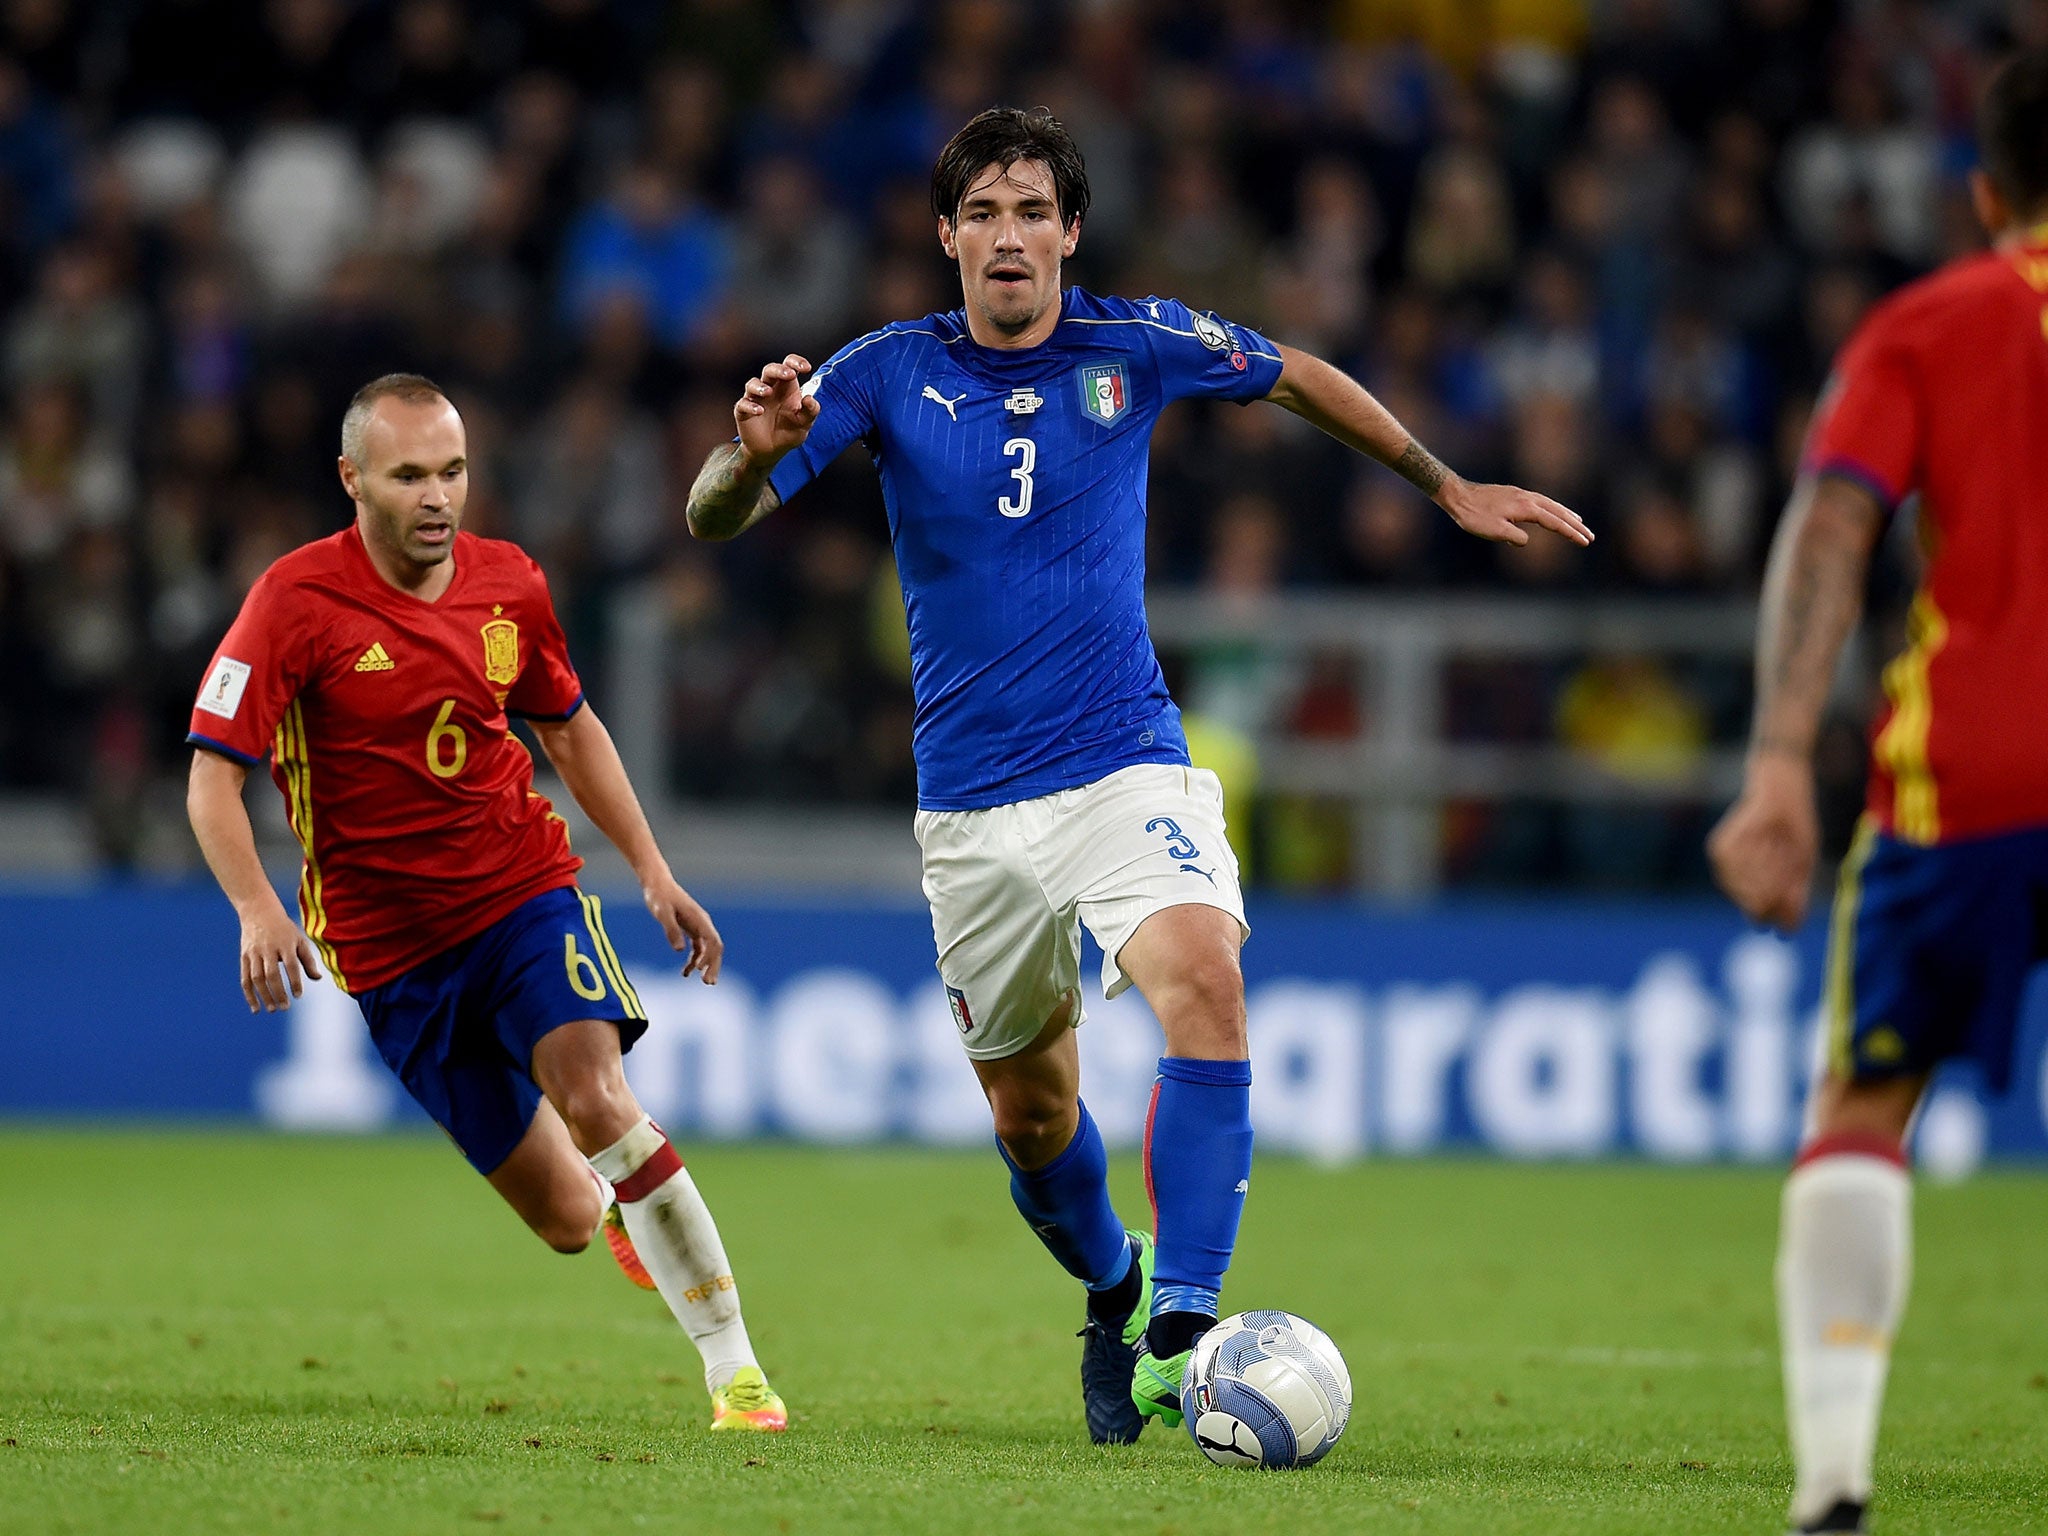 Alessio Romagnoli was called up for Italy last week to play against Spain